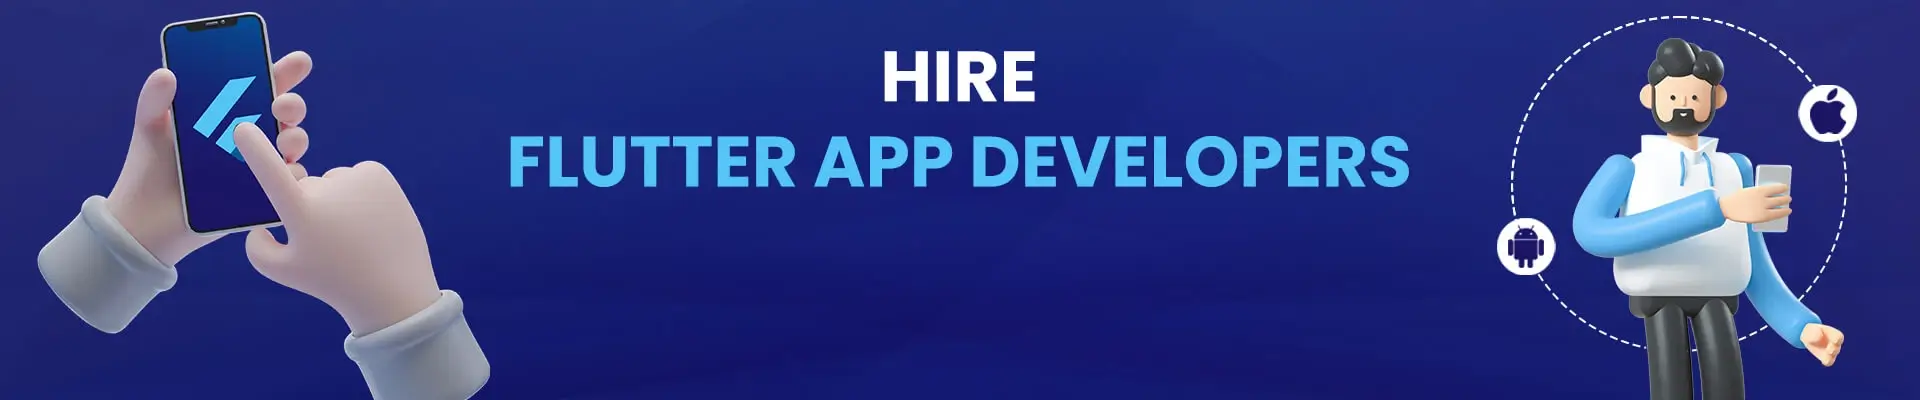 How To Hire Flutter App Developers